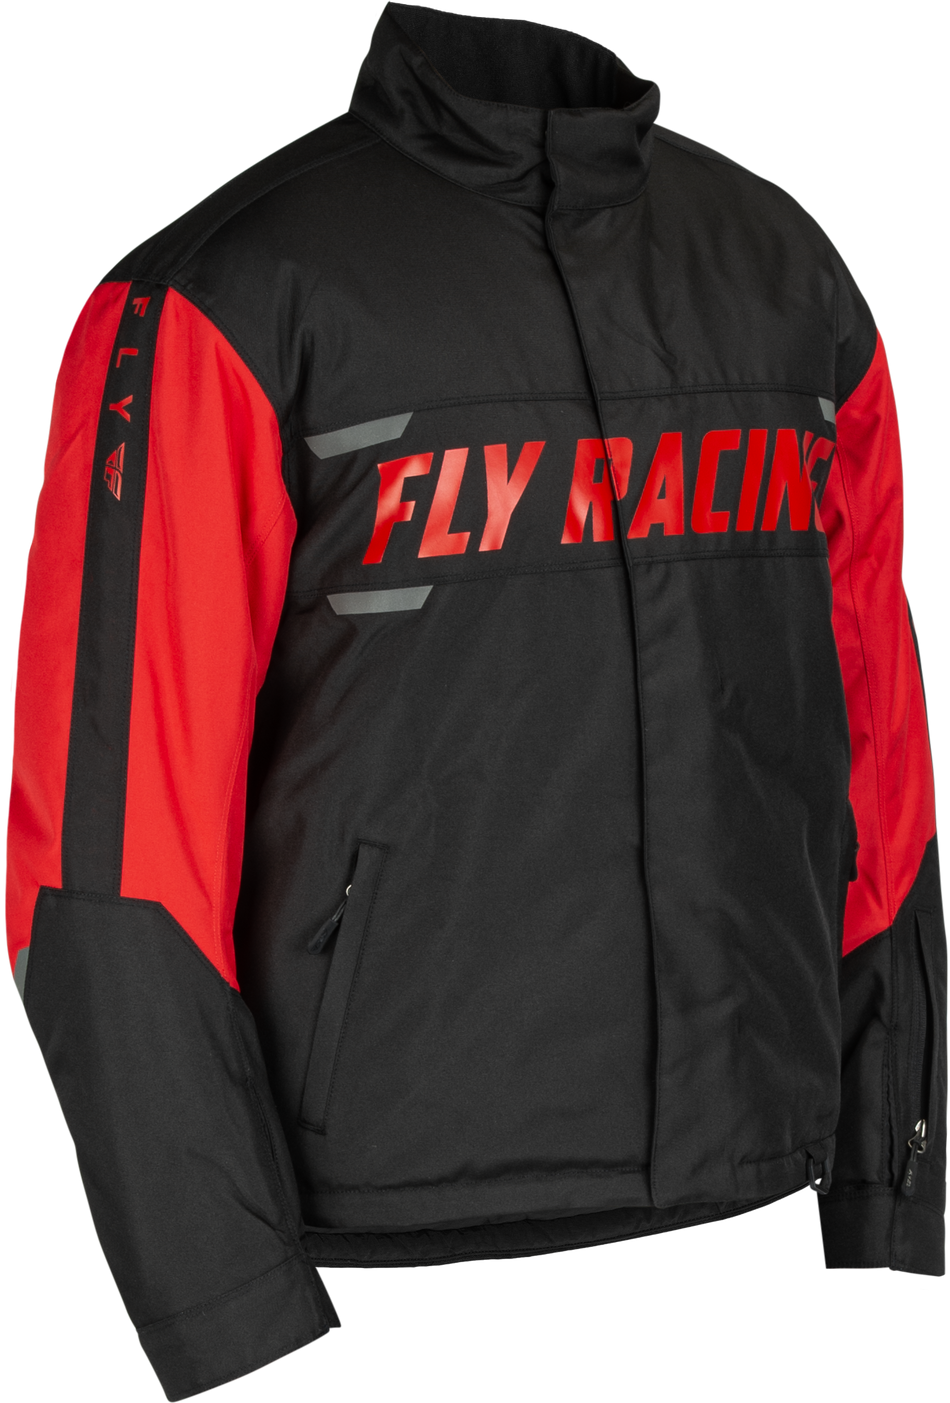 FLY RACING Outpost Jacket Black/Red Sm 470-5502S